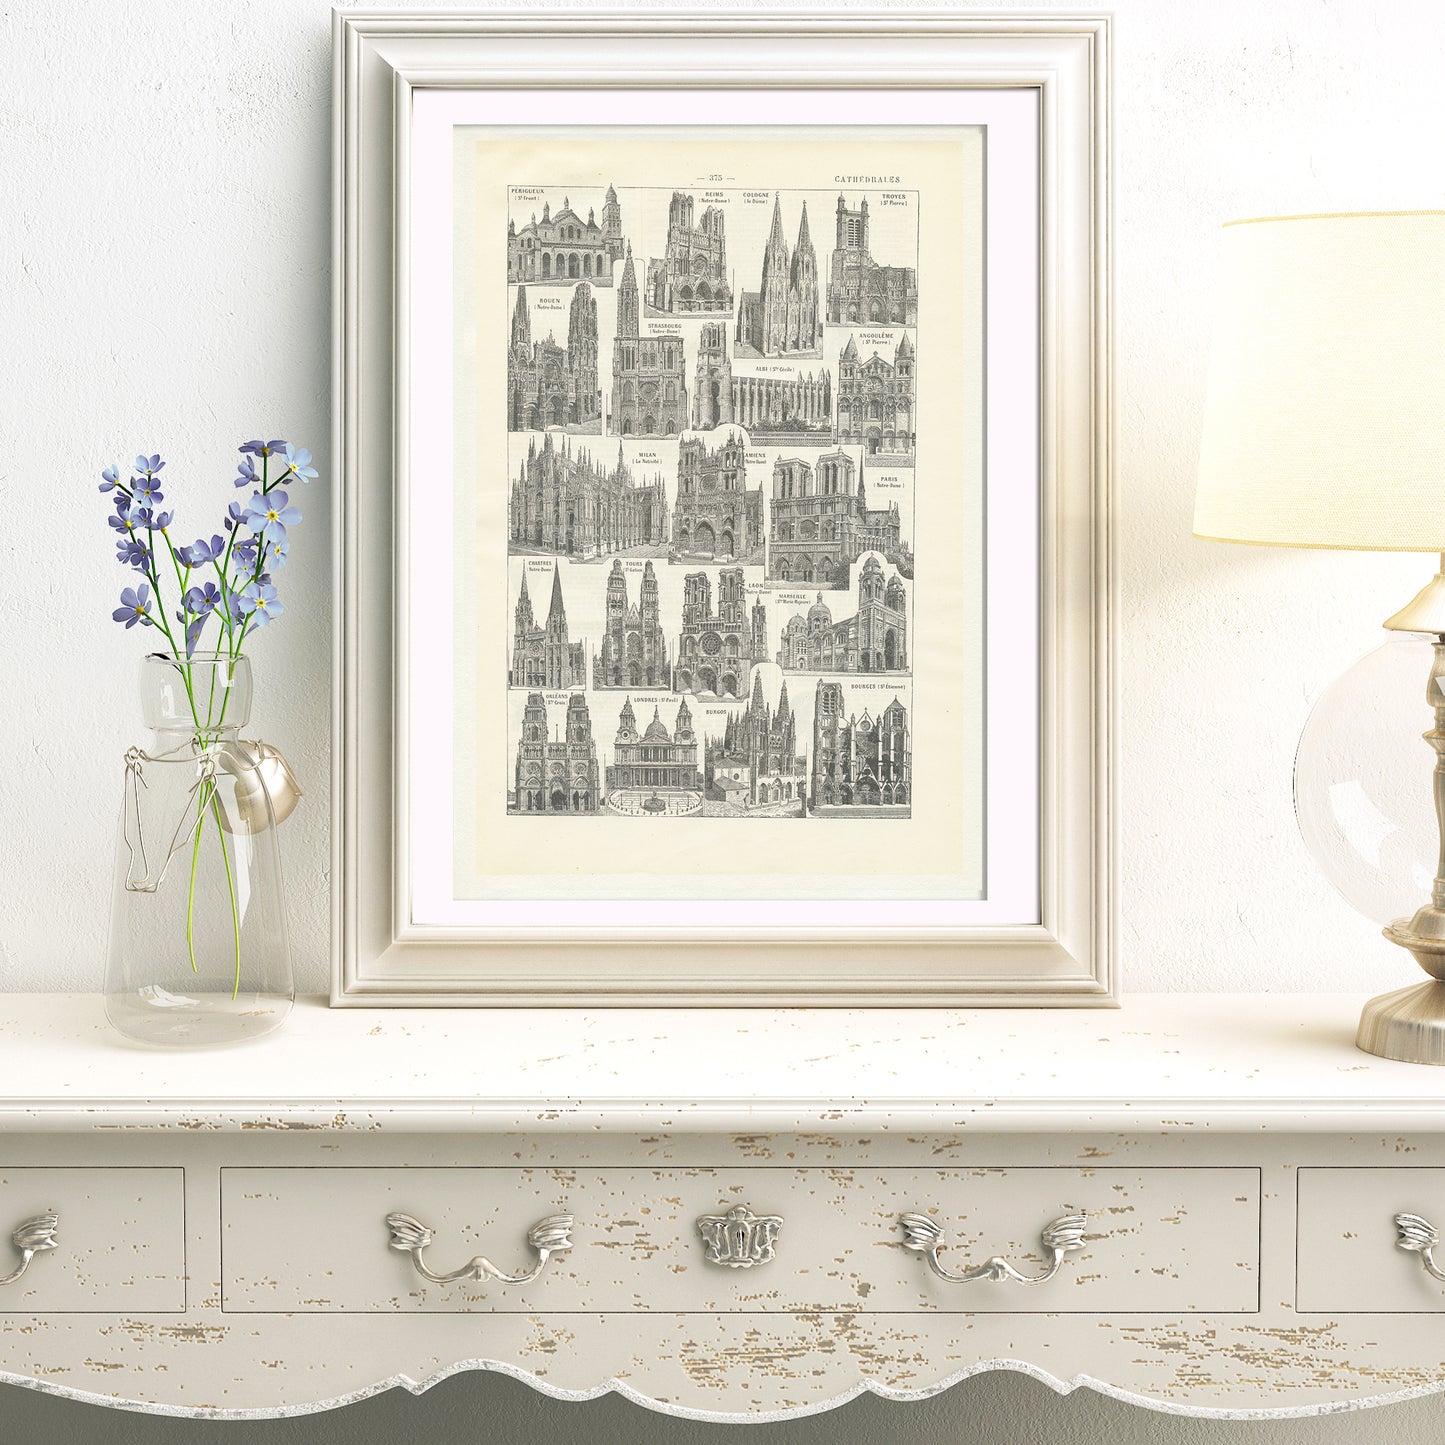 1922 French Cathedrals Print